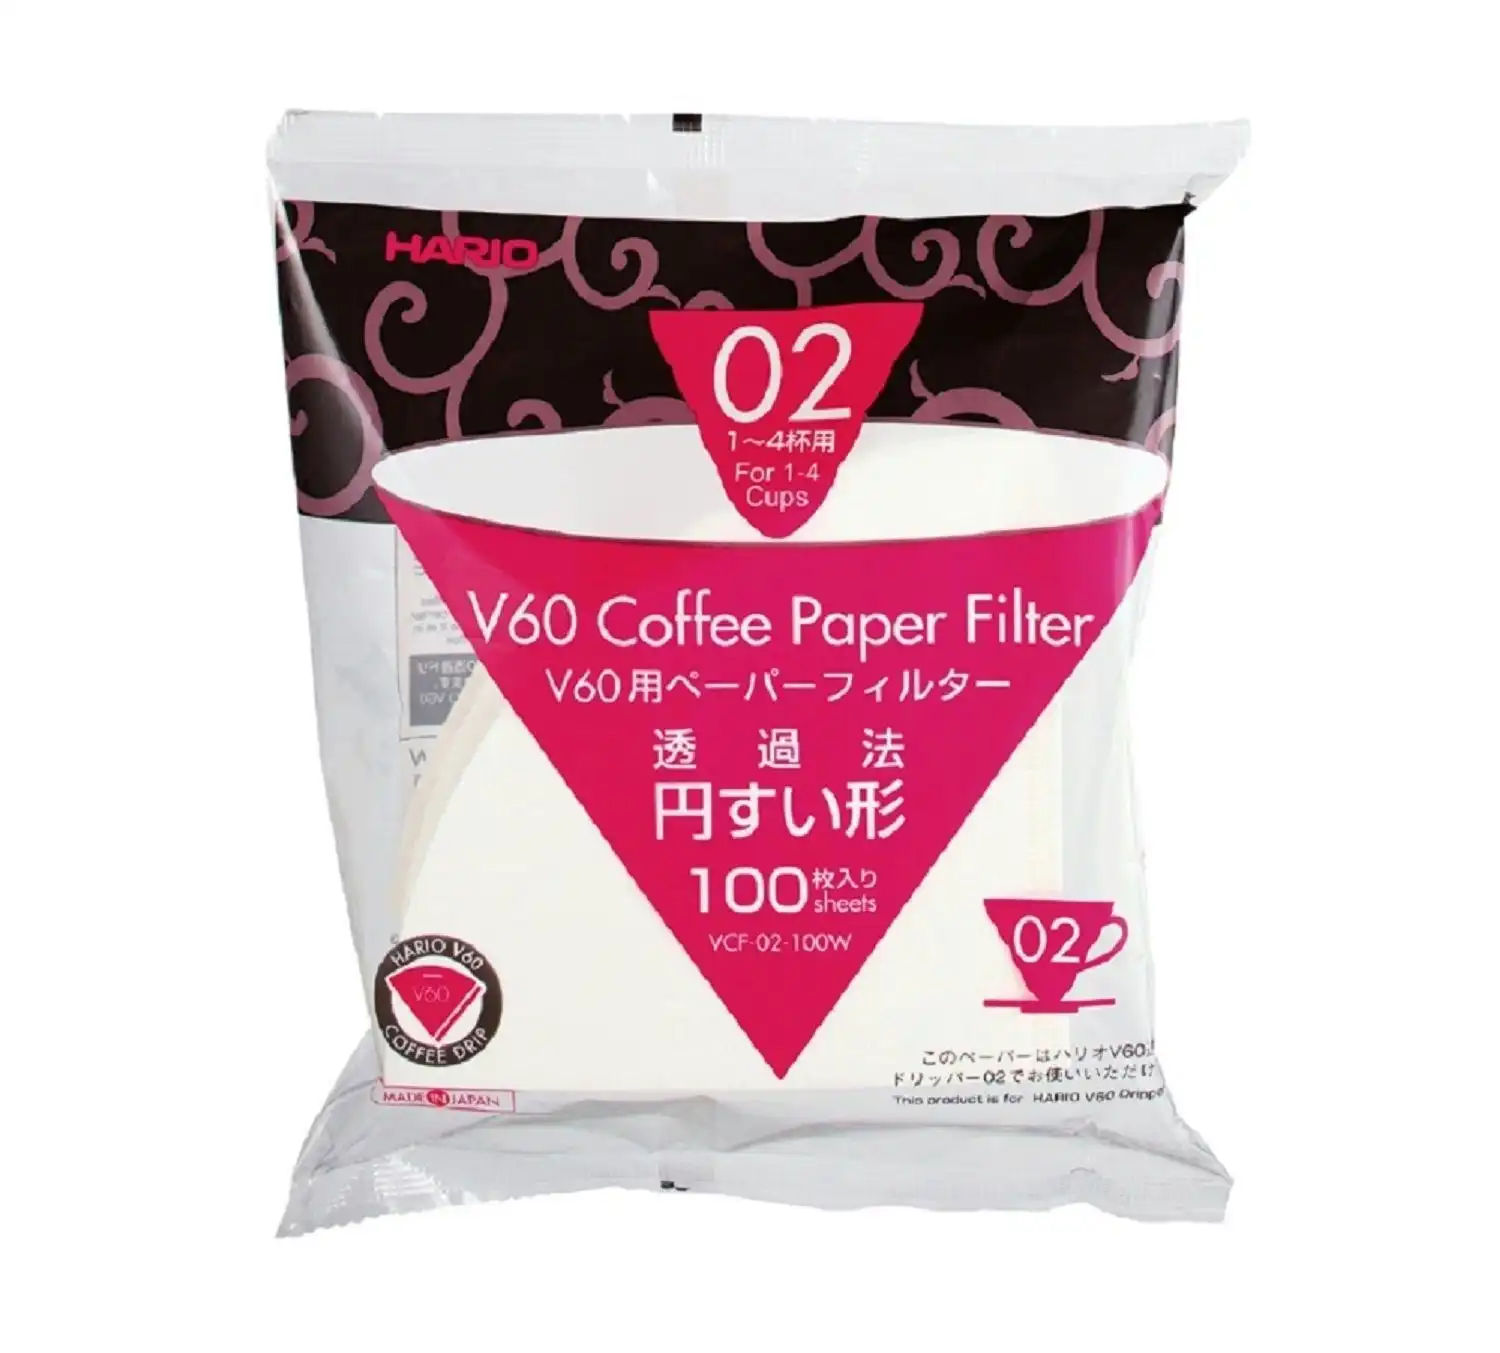 Hario V60 02   100 Filter Papers